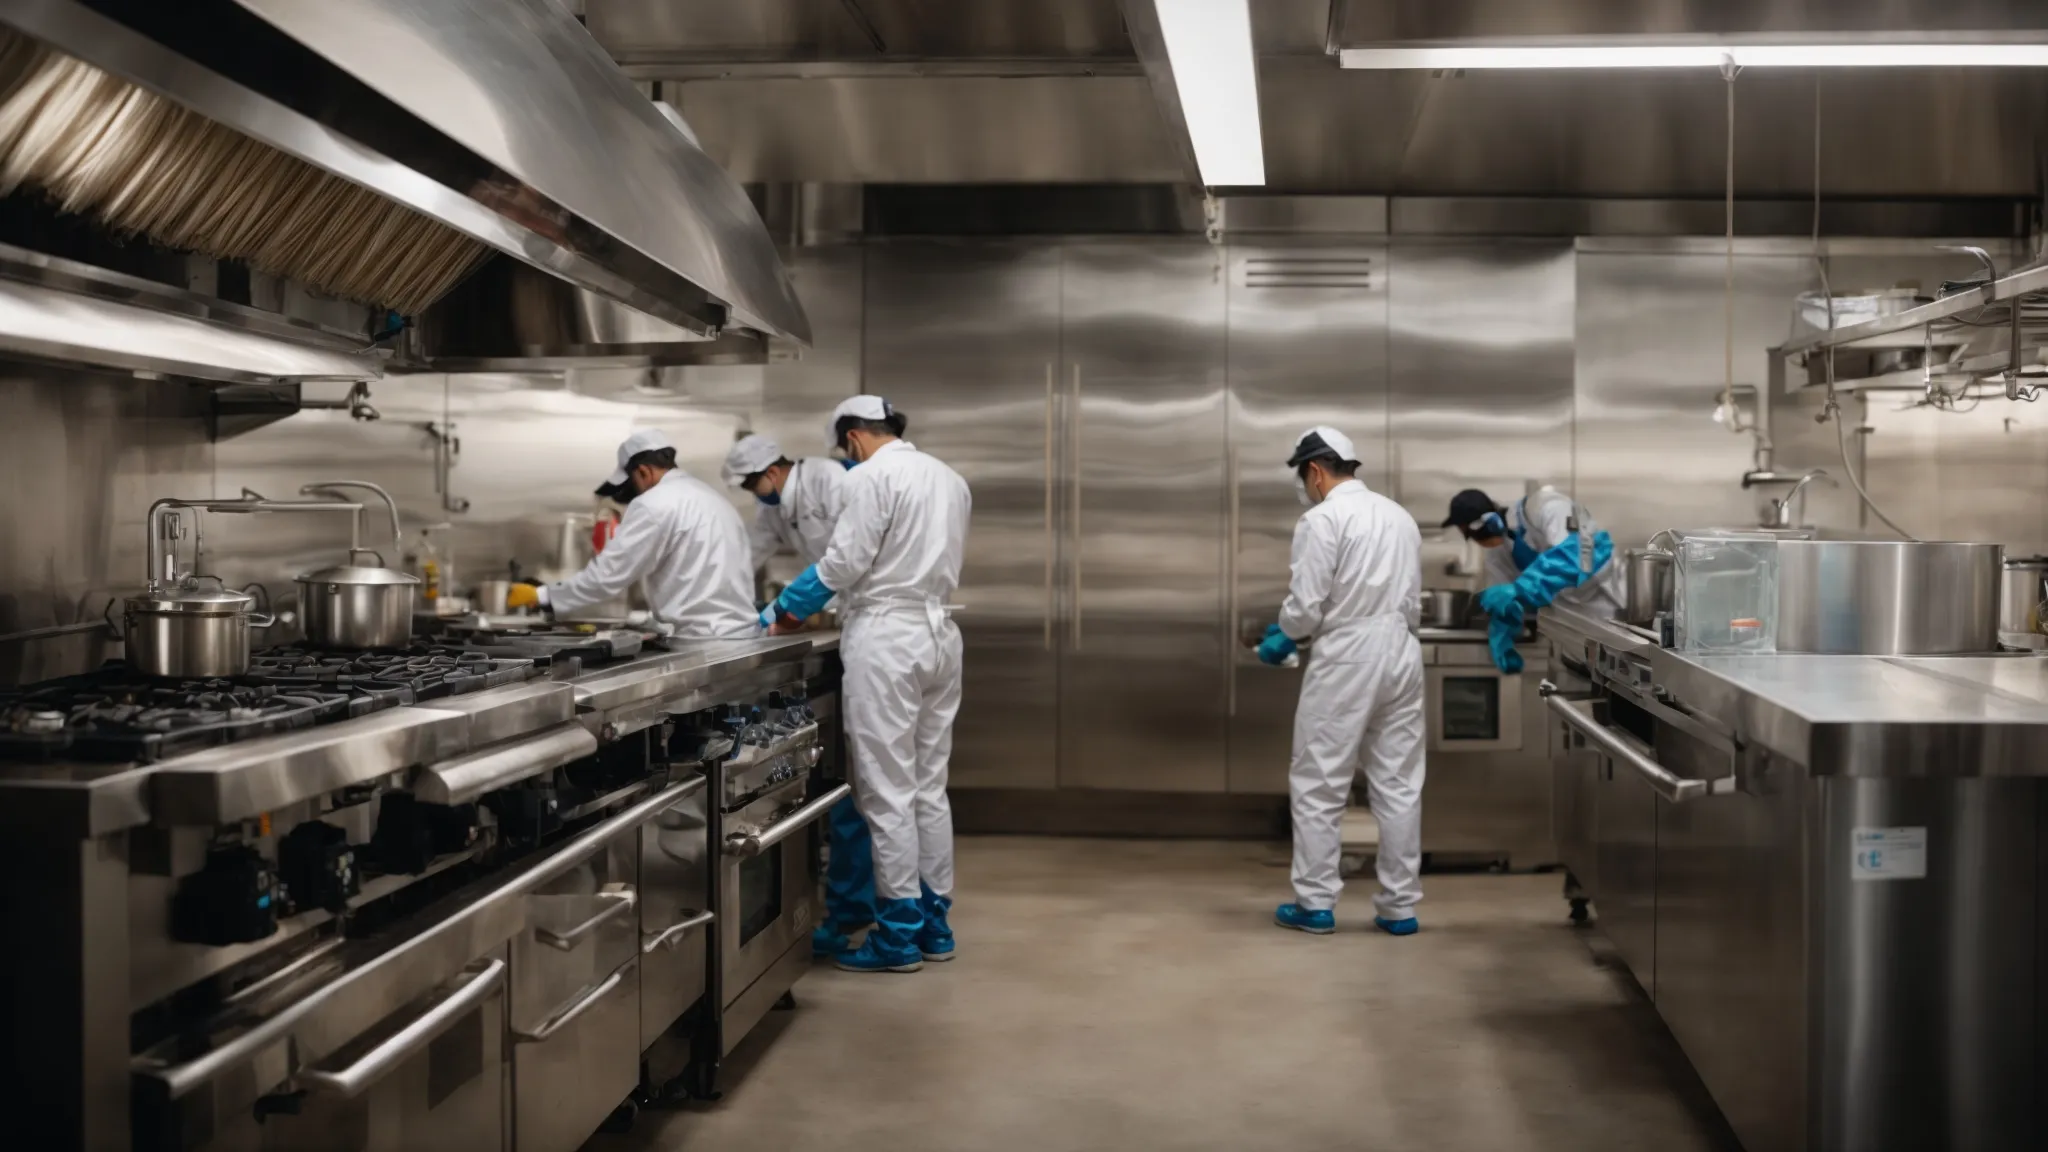 a professional cleaning team is gathered around a kitchen exhaust, closely examining its cleanliness and checking its operational efficiency.